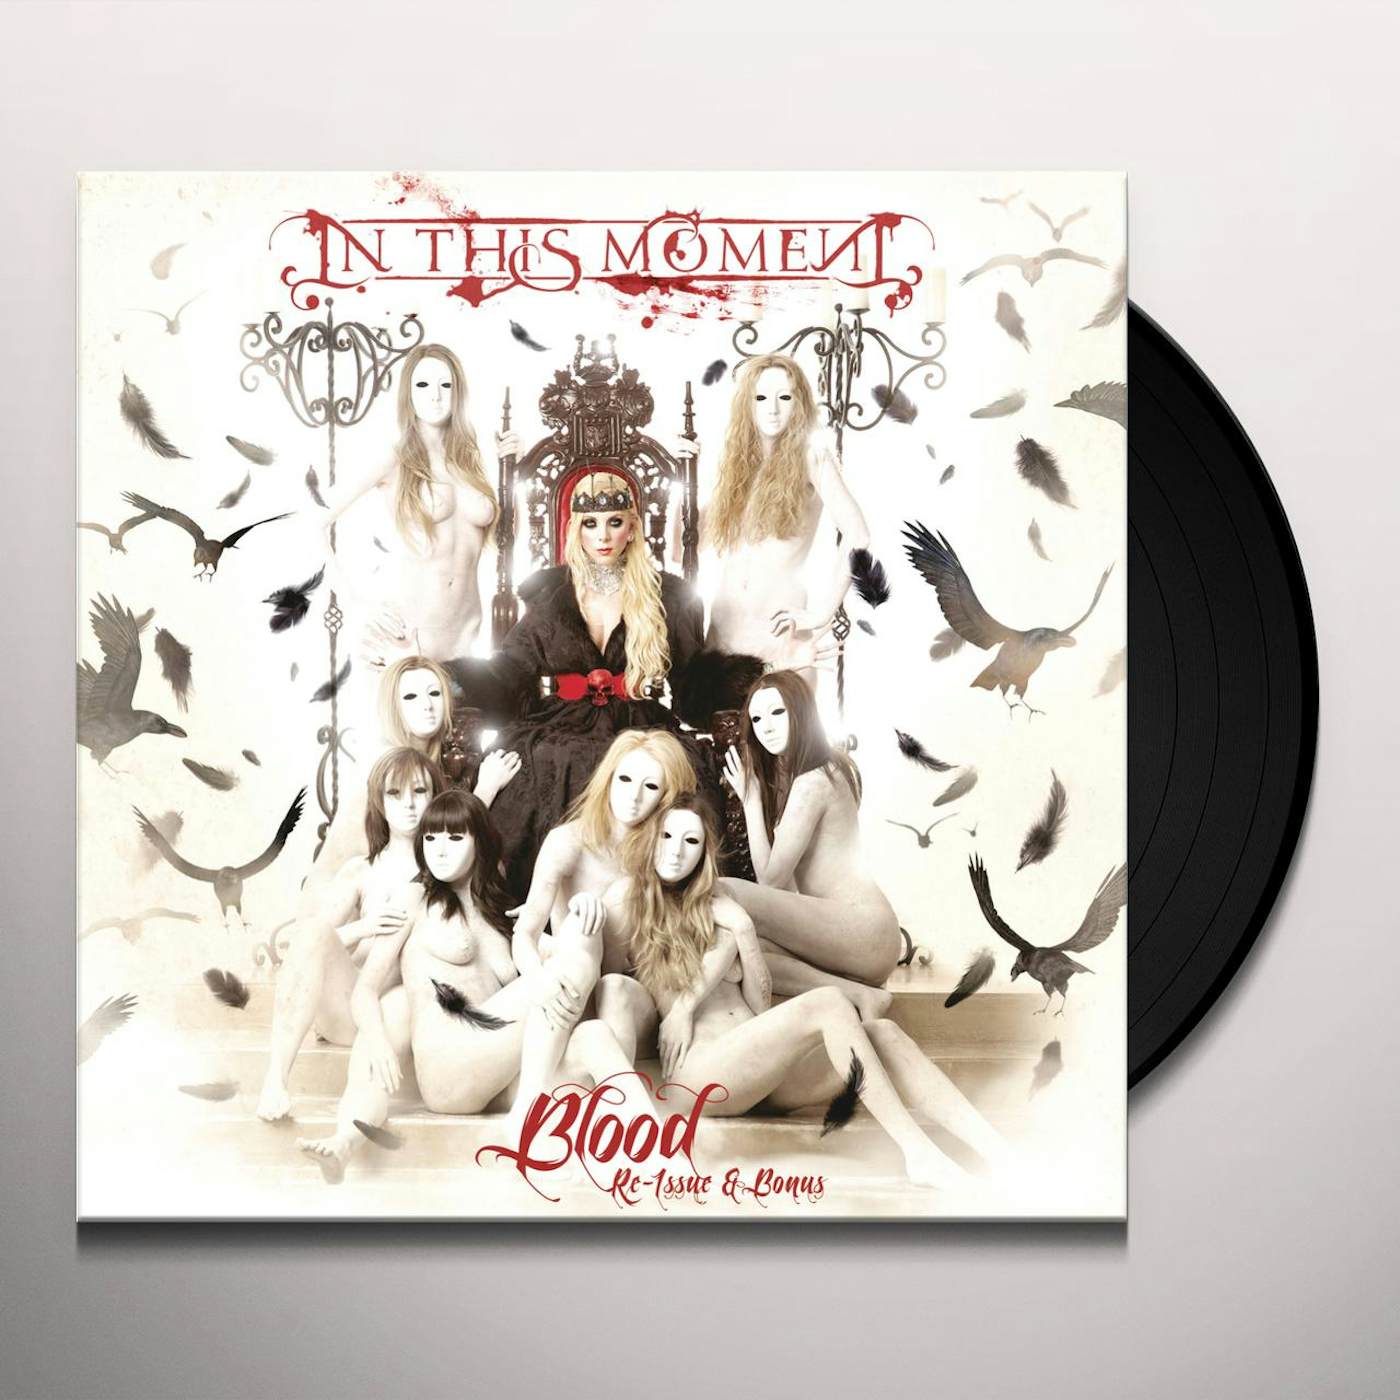 In This Moment Blood Vinyl Record